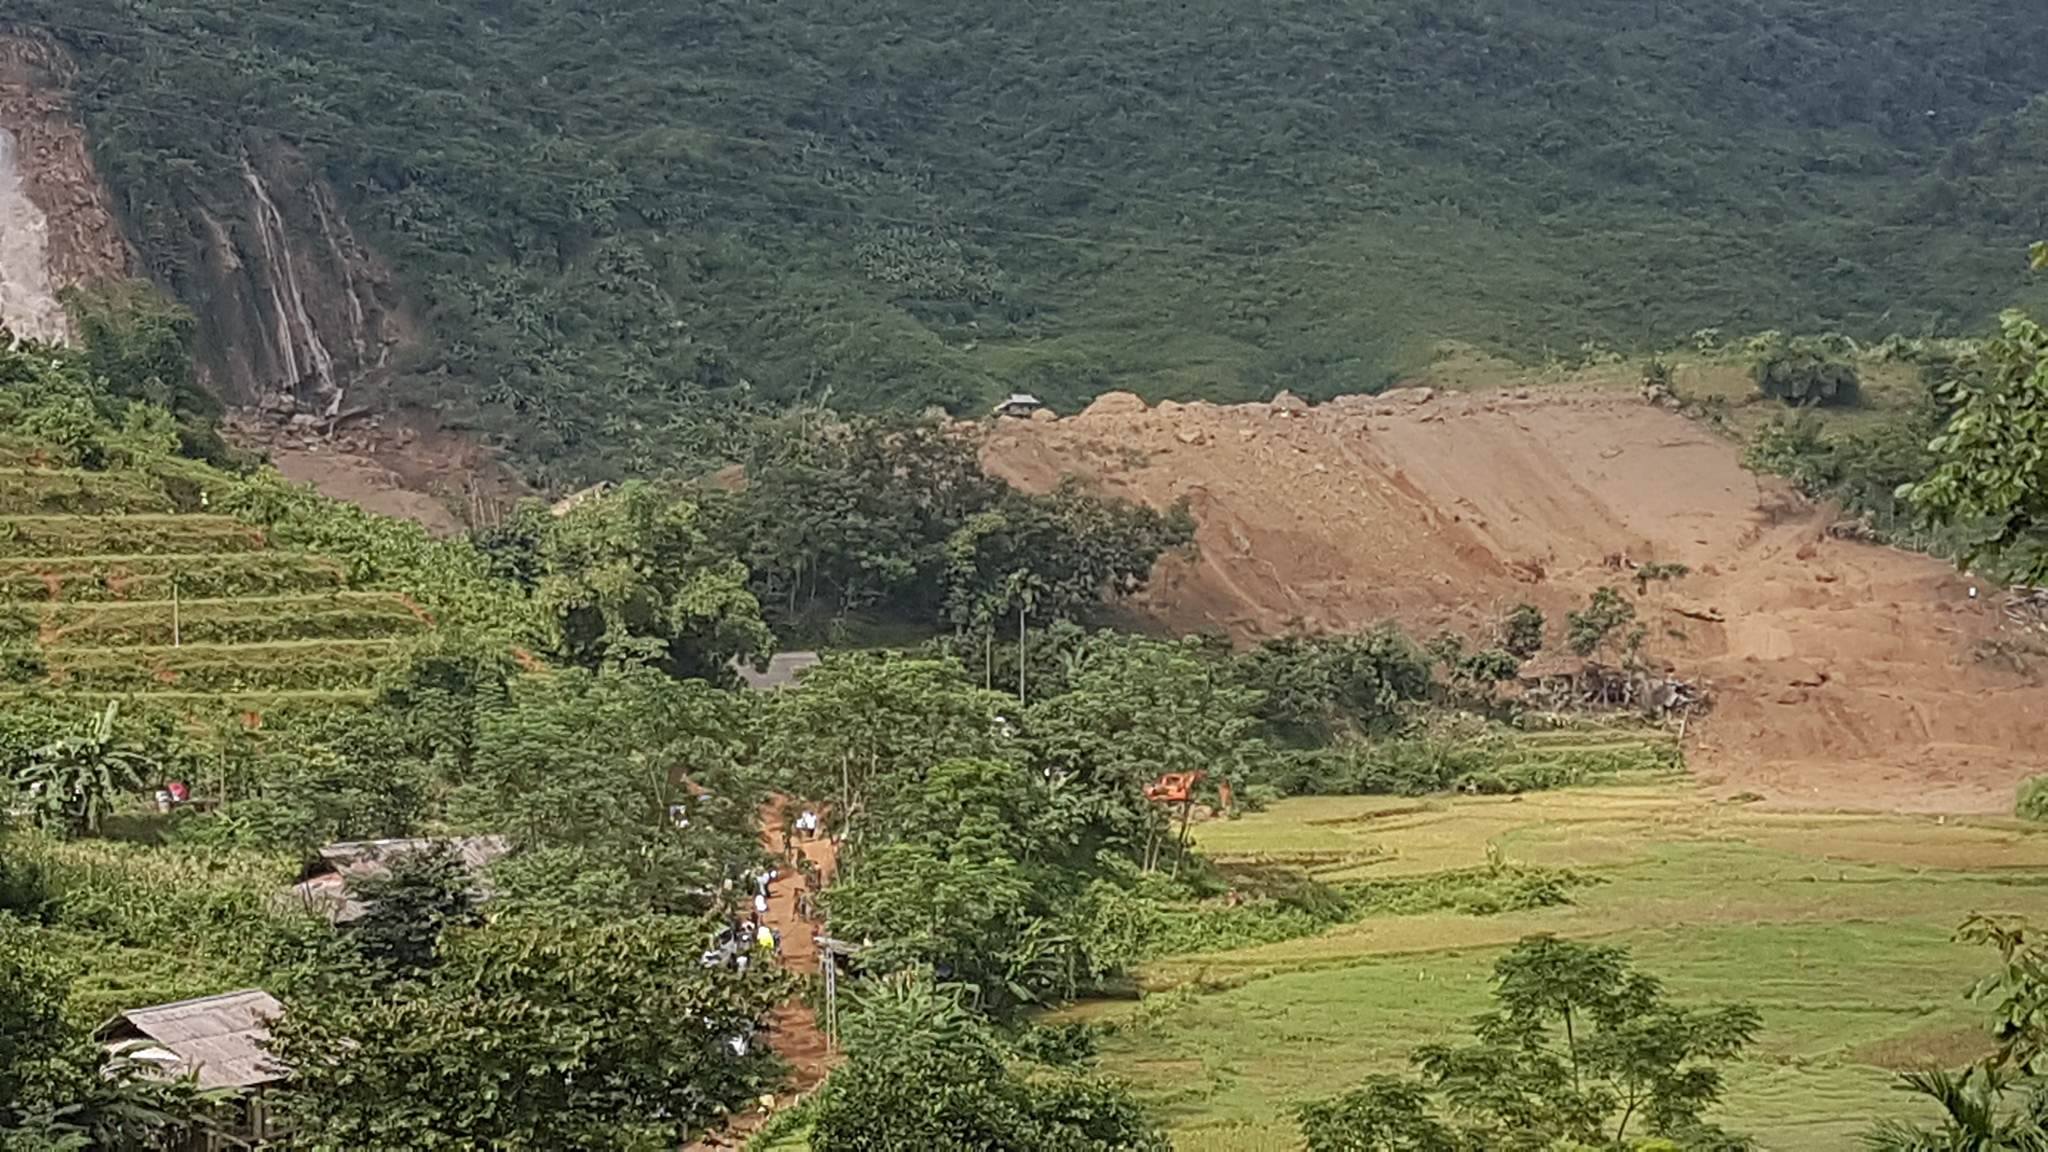 The aftermath of a landslide that buried 18 people in Khanh Village in the northern province of Hoa Binh, on October 12, 2017.  Photo: Tuoi Tre